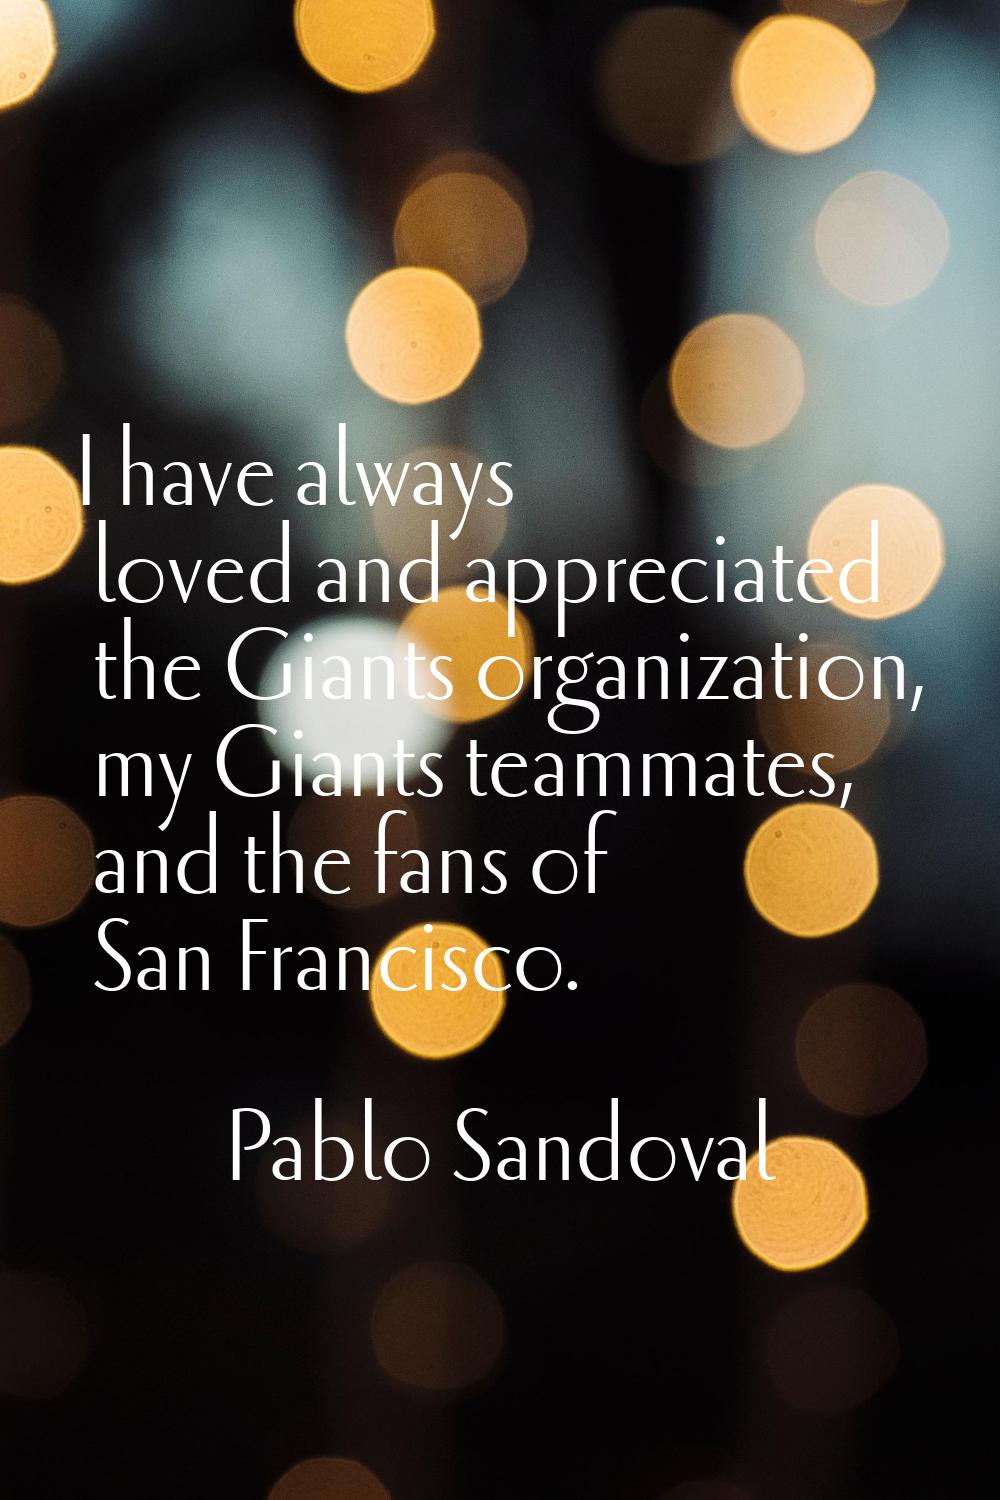 I have always loved and appreciated the Giants organization, my Giants teammates, and the fans of S